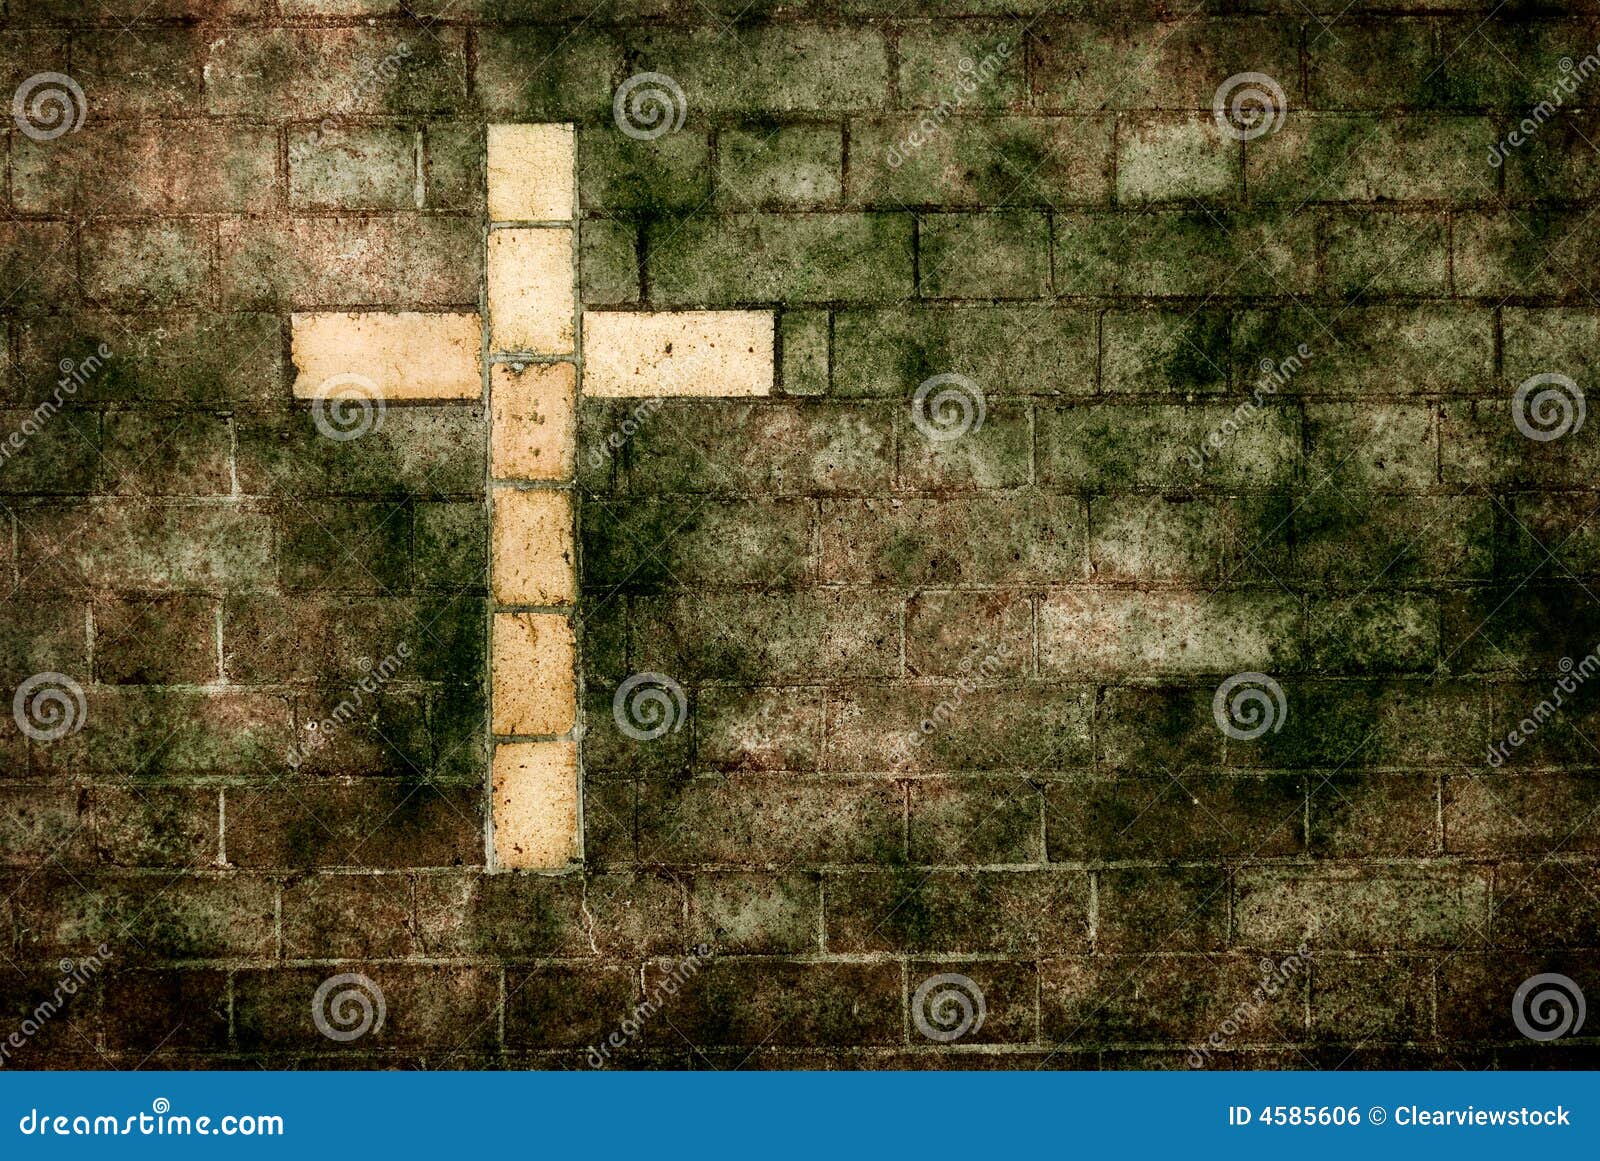 cross of christ built in wall